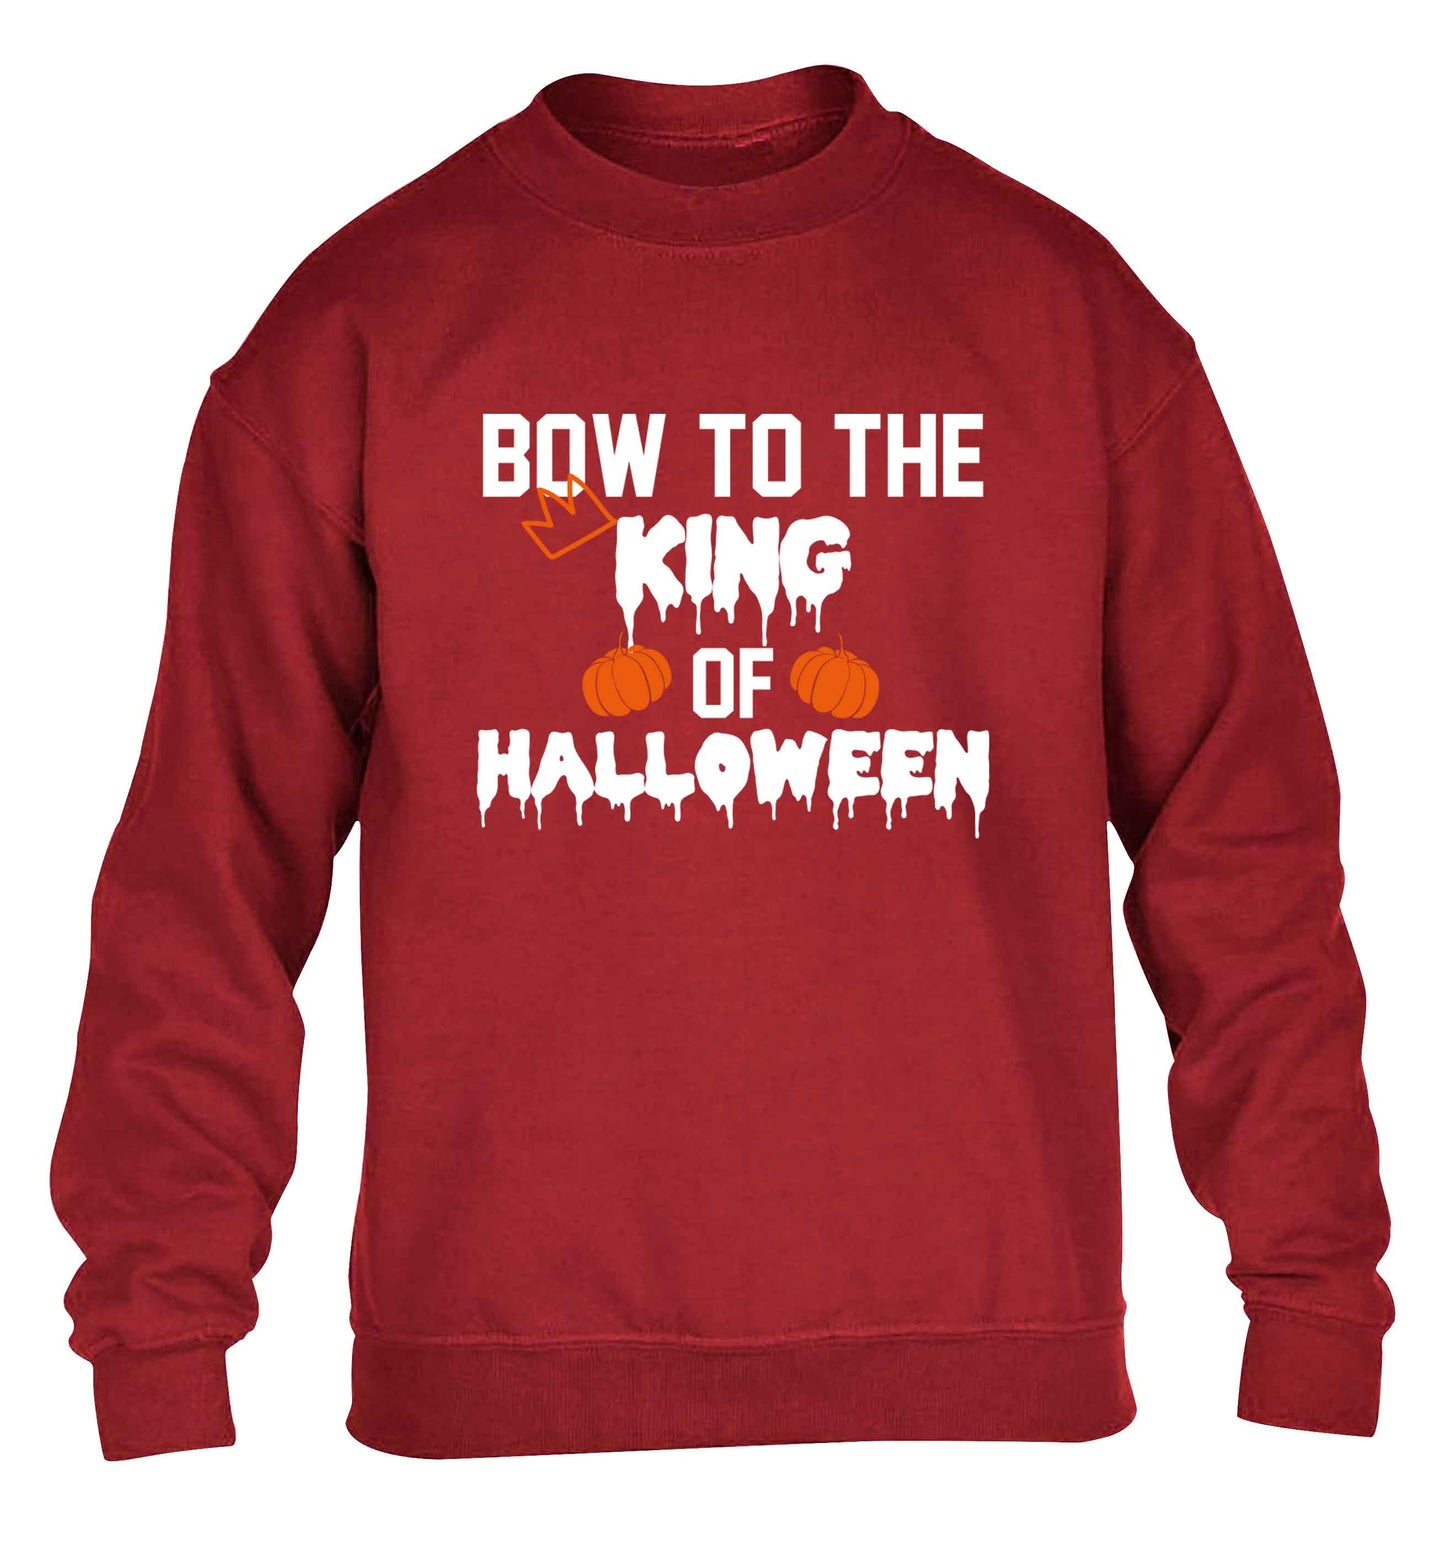 Bow to the King of halloween children's grey sweater 12-13 Years